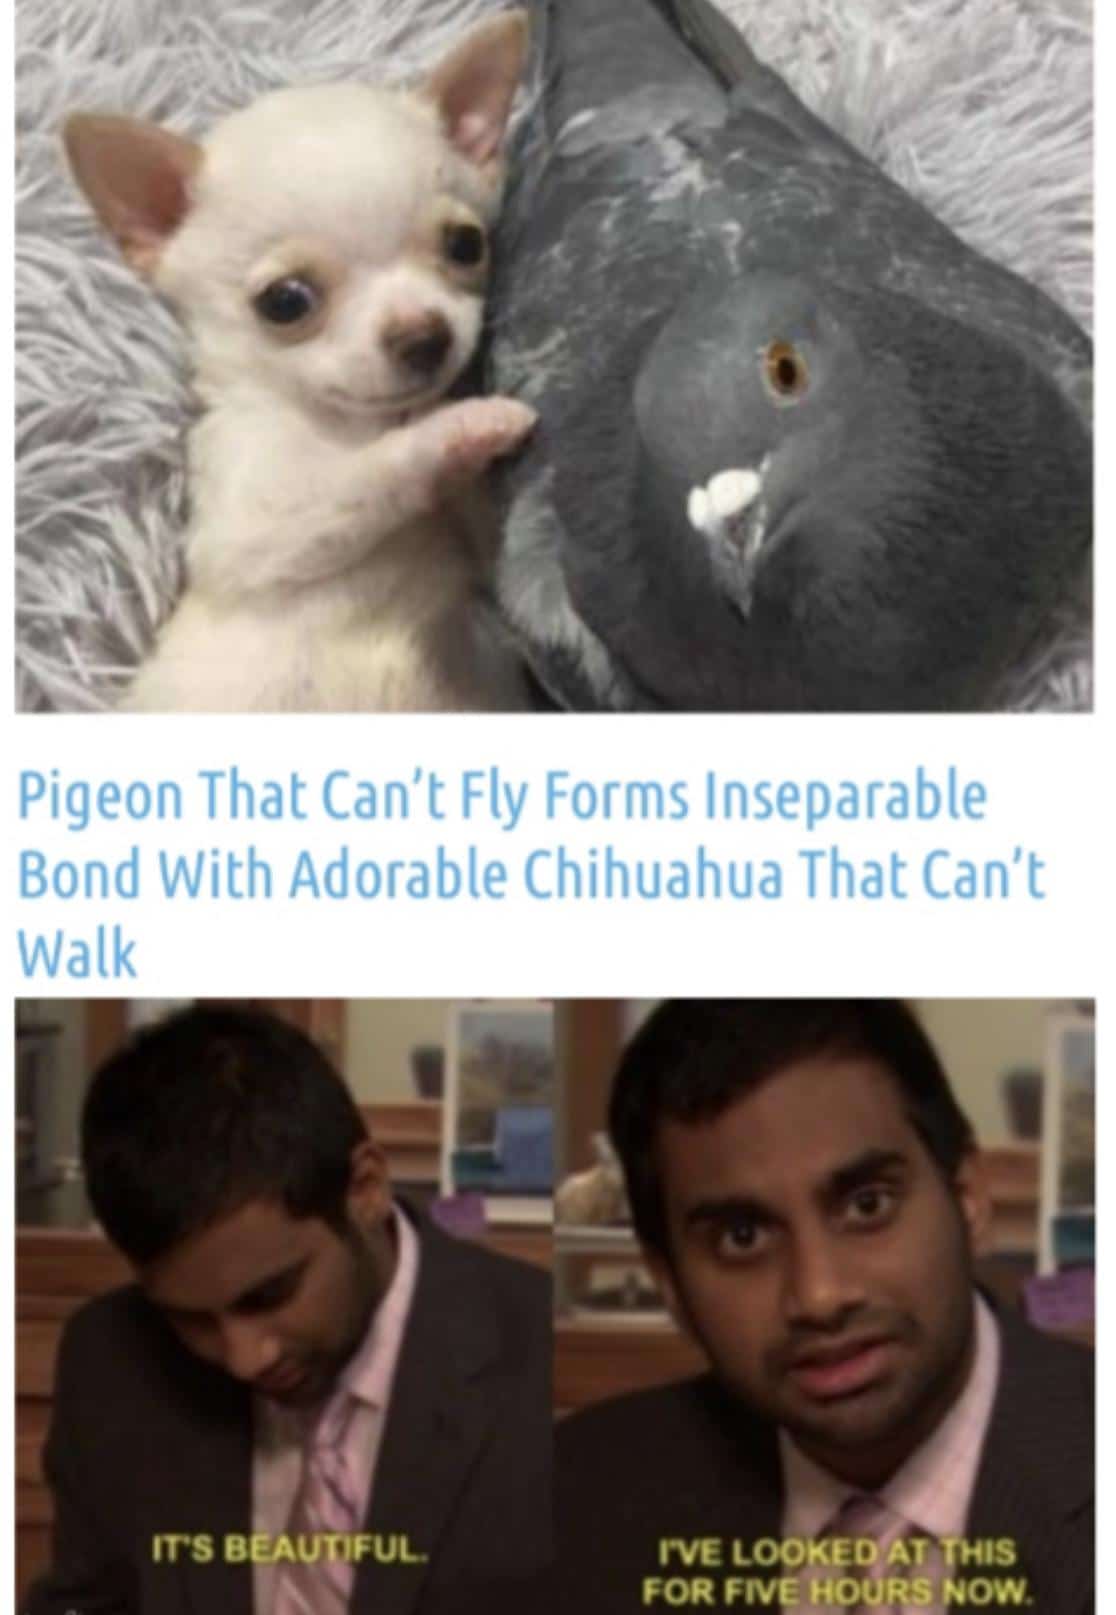 Wholesome memes, Makes Wholesome Memes Wholesome memes, Makes text: Pigeon That Can't Fly Forms Inseparable Bond With Adorable Chihuahua That Can't Walk tvs B UVUC rvE LOOKED AT HIS FOR FIVE HOtJRé NOW. 